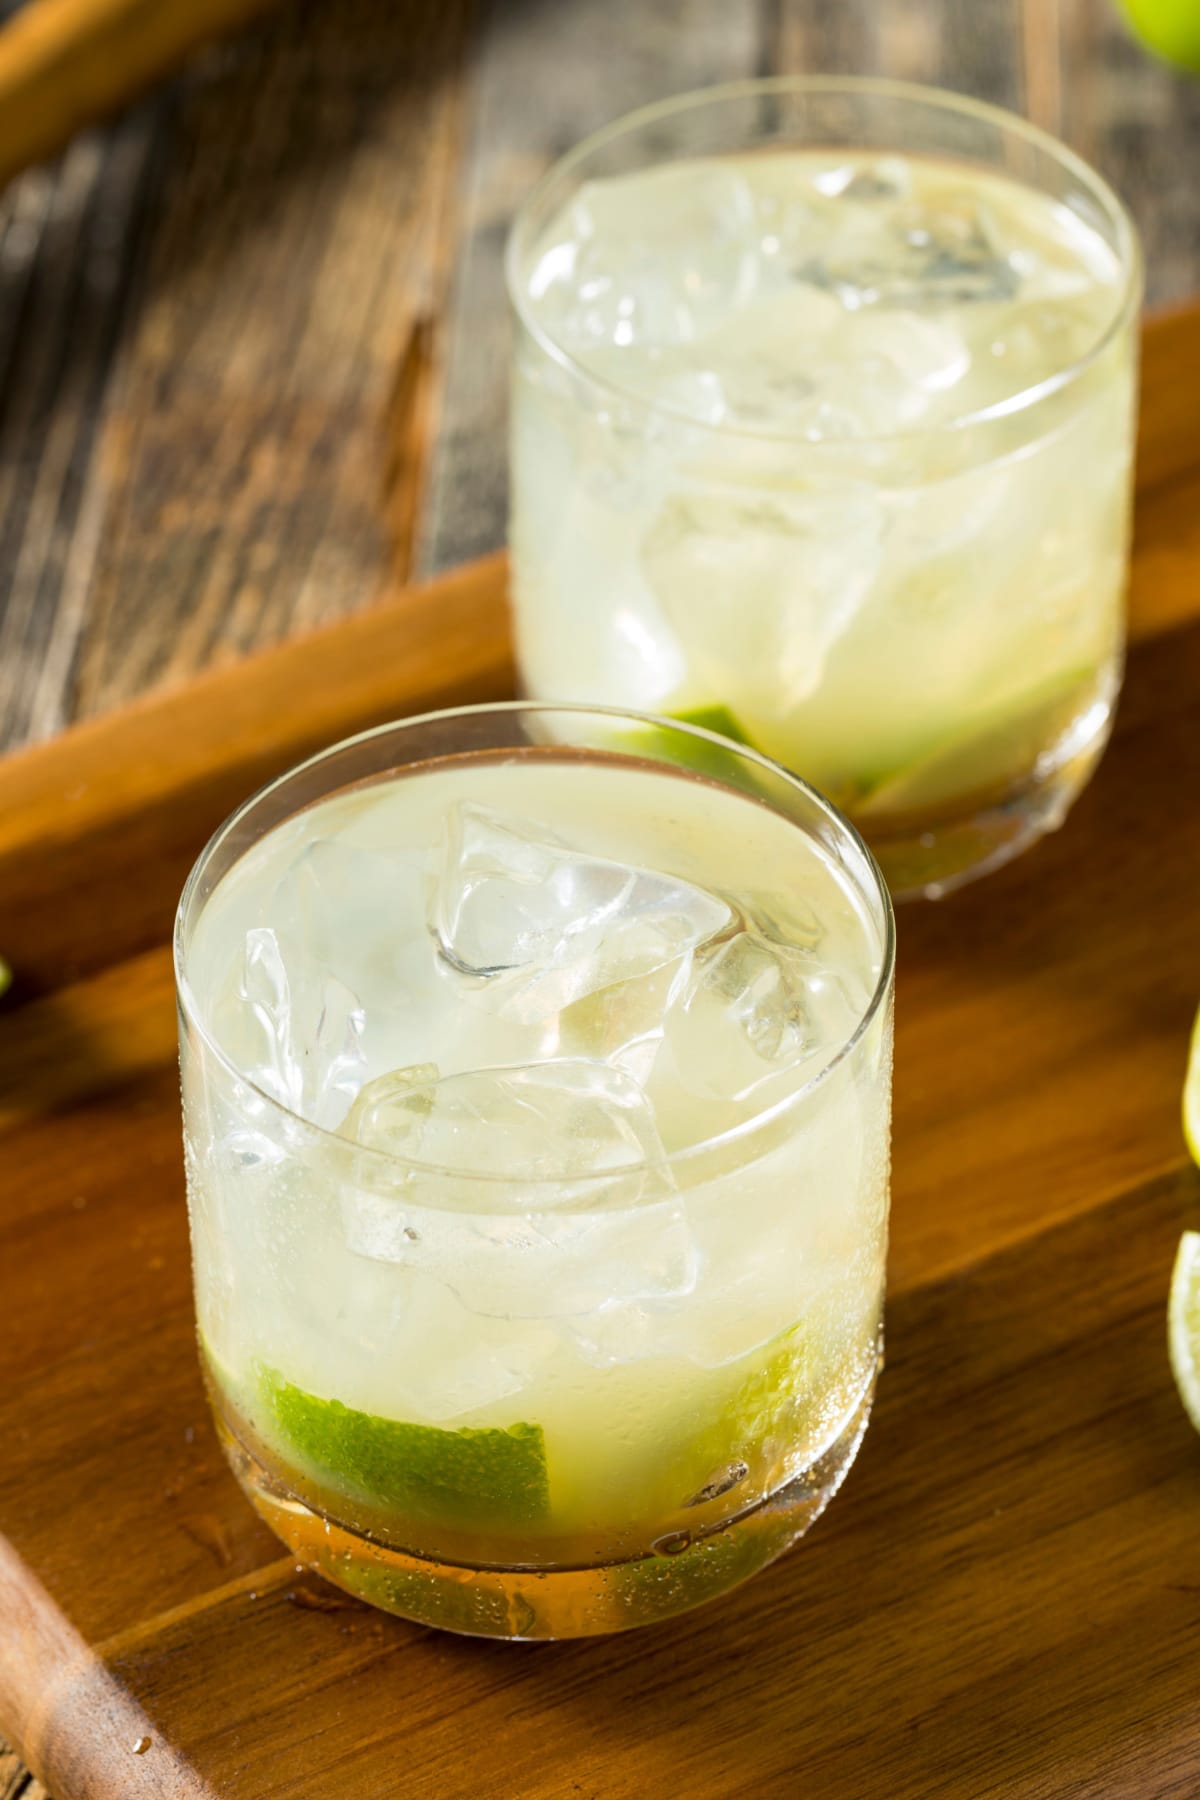 Caipirinha Cocktail Recipe- A Brazilian Drink featuring Refreshing Caipirinha Cocktail in Old-Fashioned Glasses on the Rocks with Lime